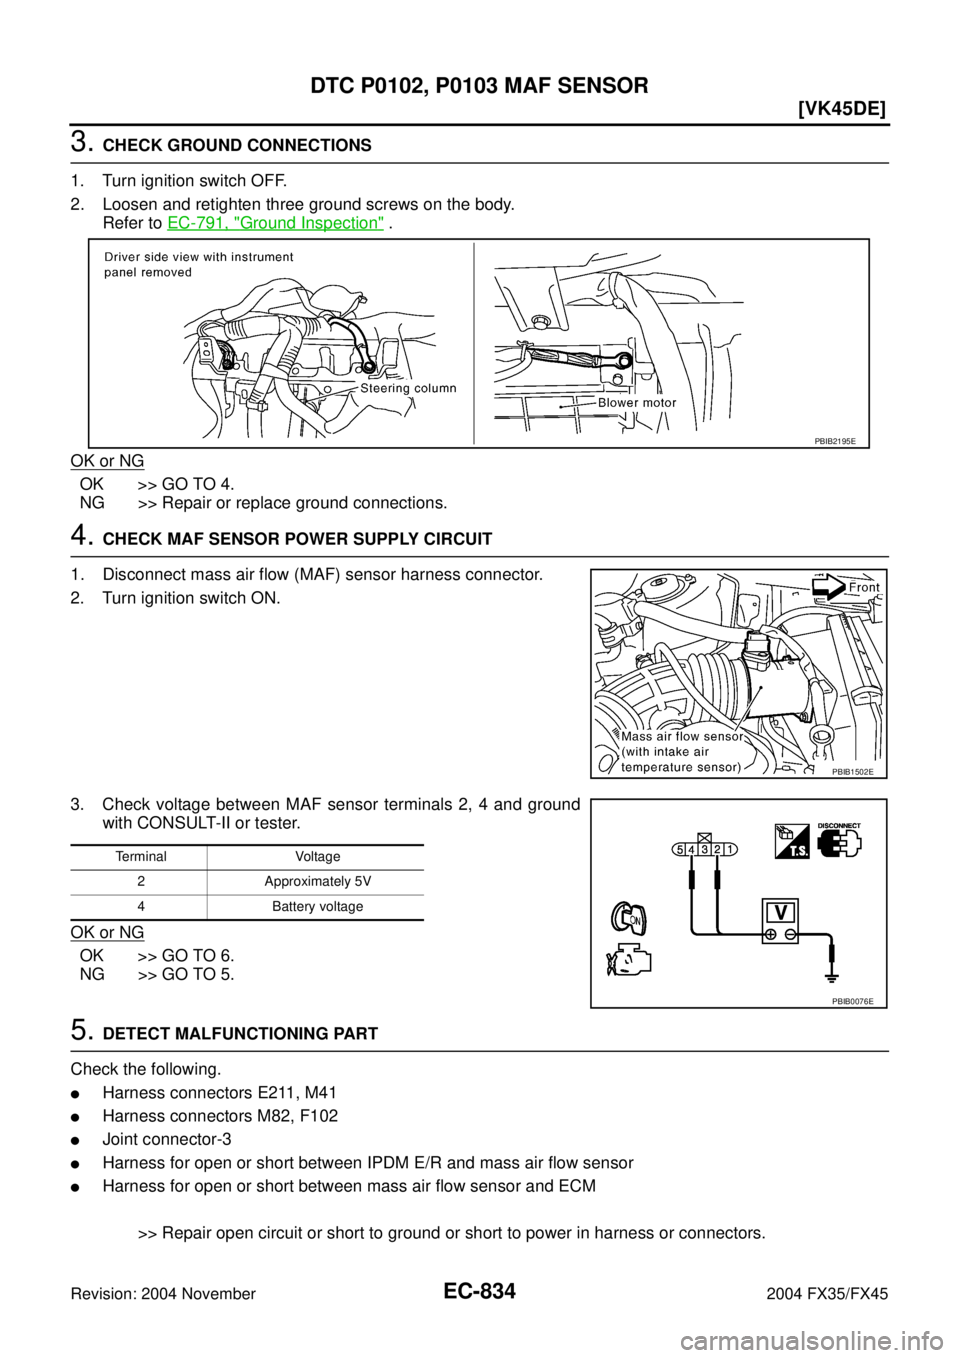 INFINITI FX35 2004  Service Manual EC-834
[VK45DE]
DTC P0102, P0103 MAF SENSOR
Revision: 2004 November 2004 FX35/FX45
3. CHECK GROUND CONNECTIONS
1. Turn ignition switch OFF.
2. Loosen and retighten three ground screws on the body.
Ref